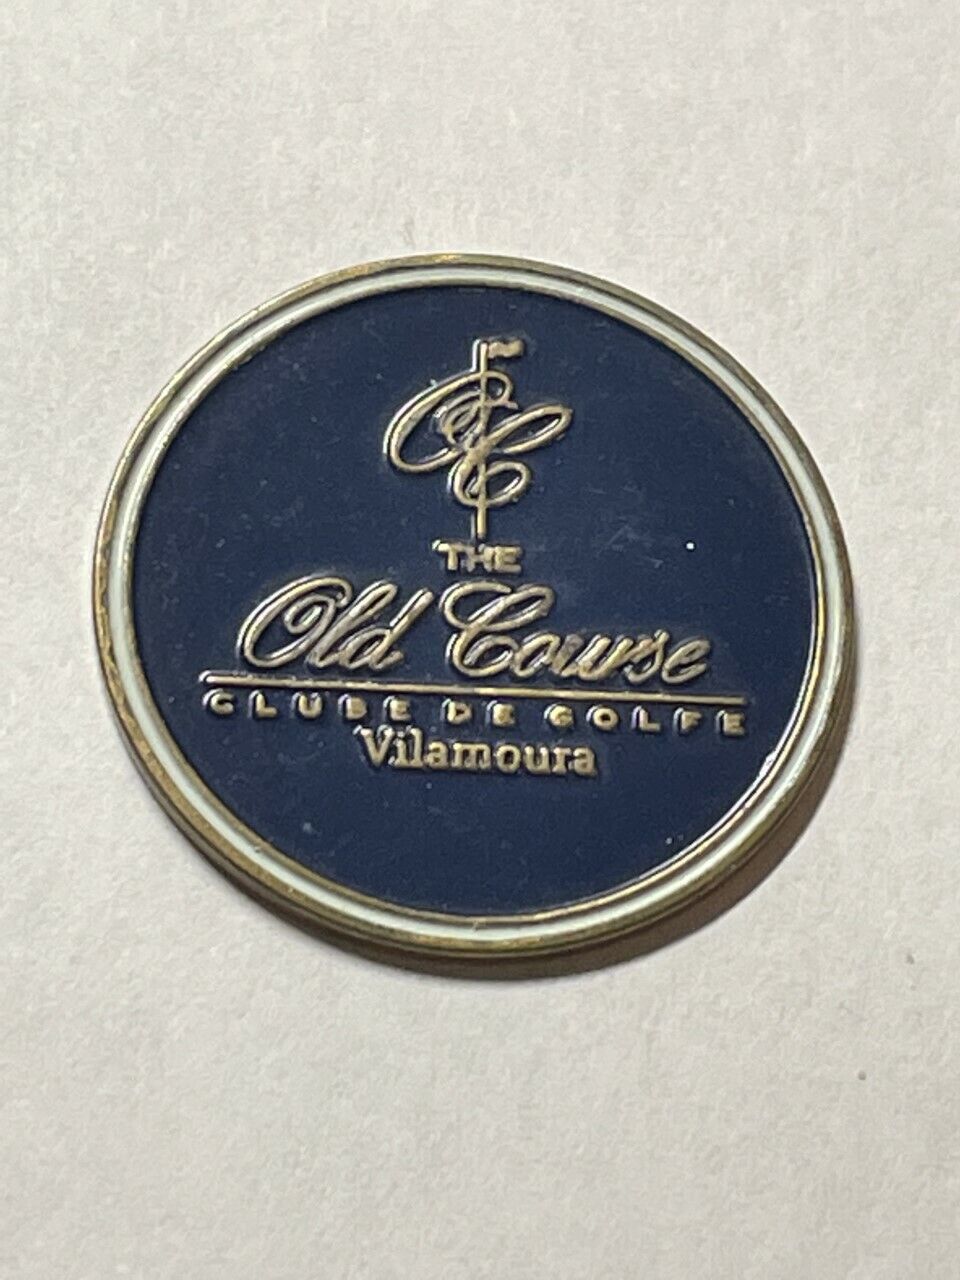 Villamoura Golf 'The Old Course' 1" Coin Style Golf Marker - Quarteira, Portugal